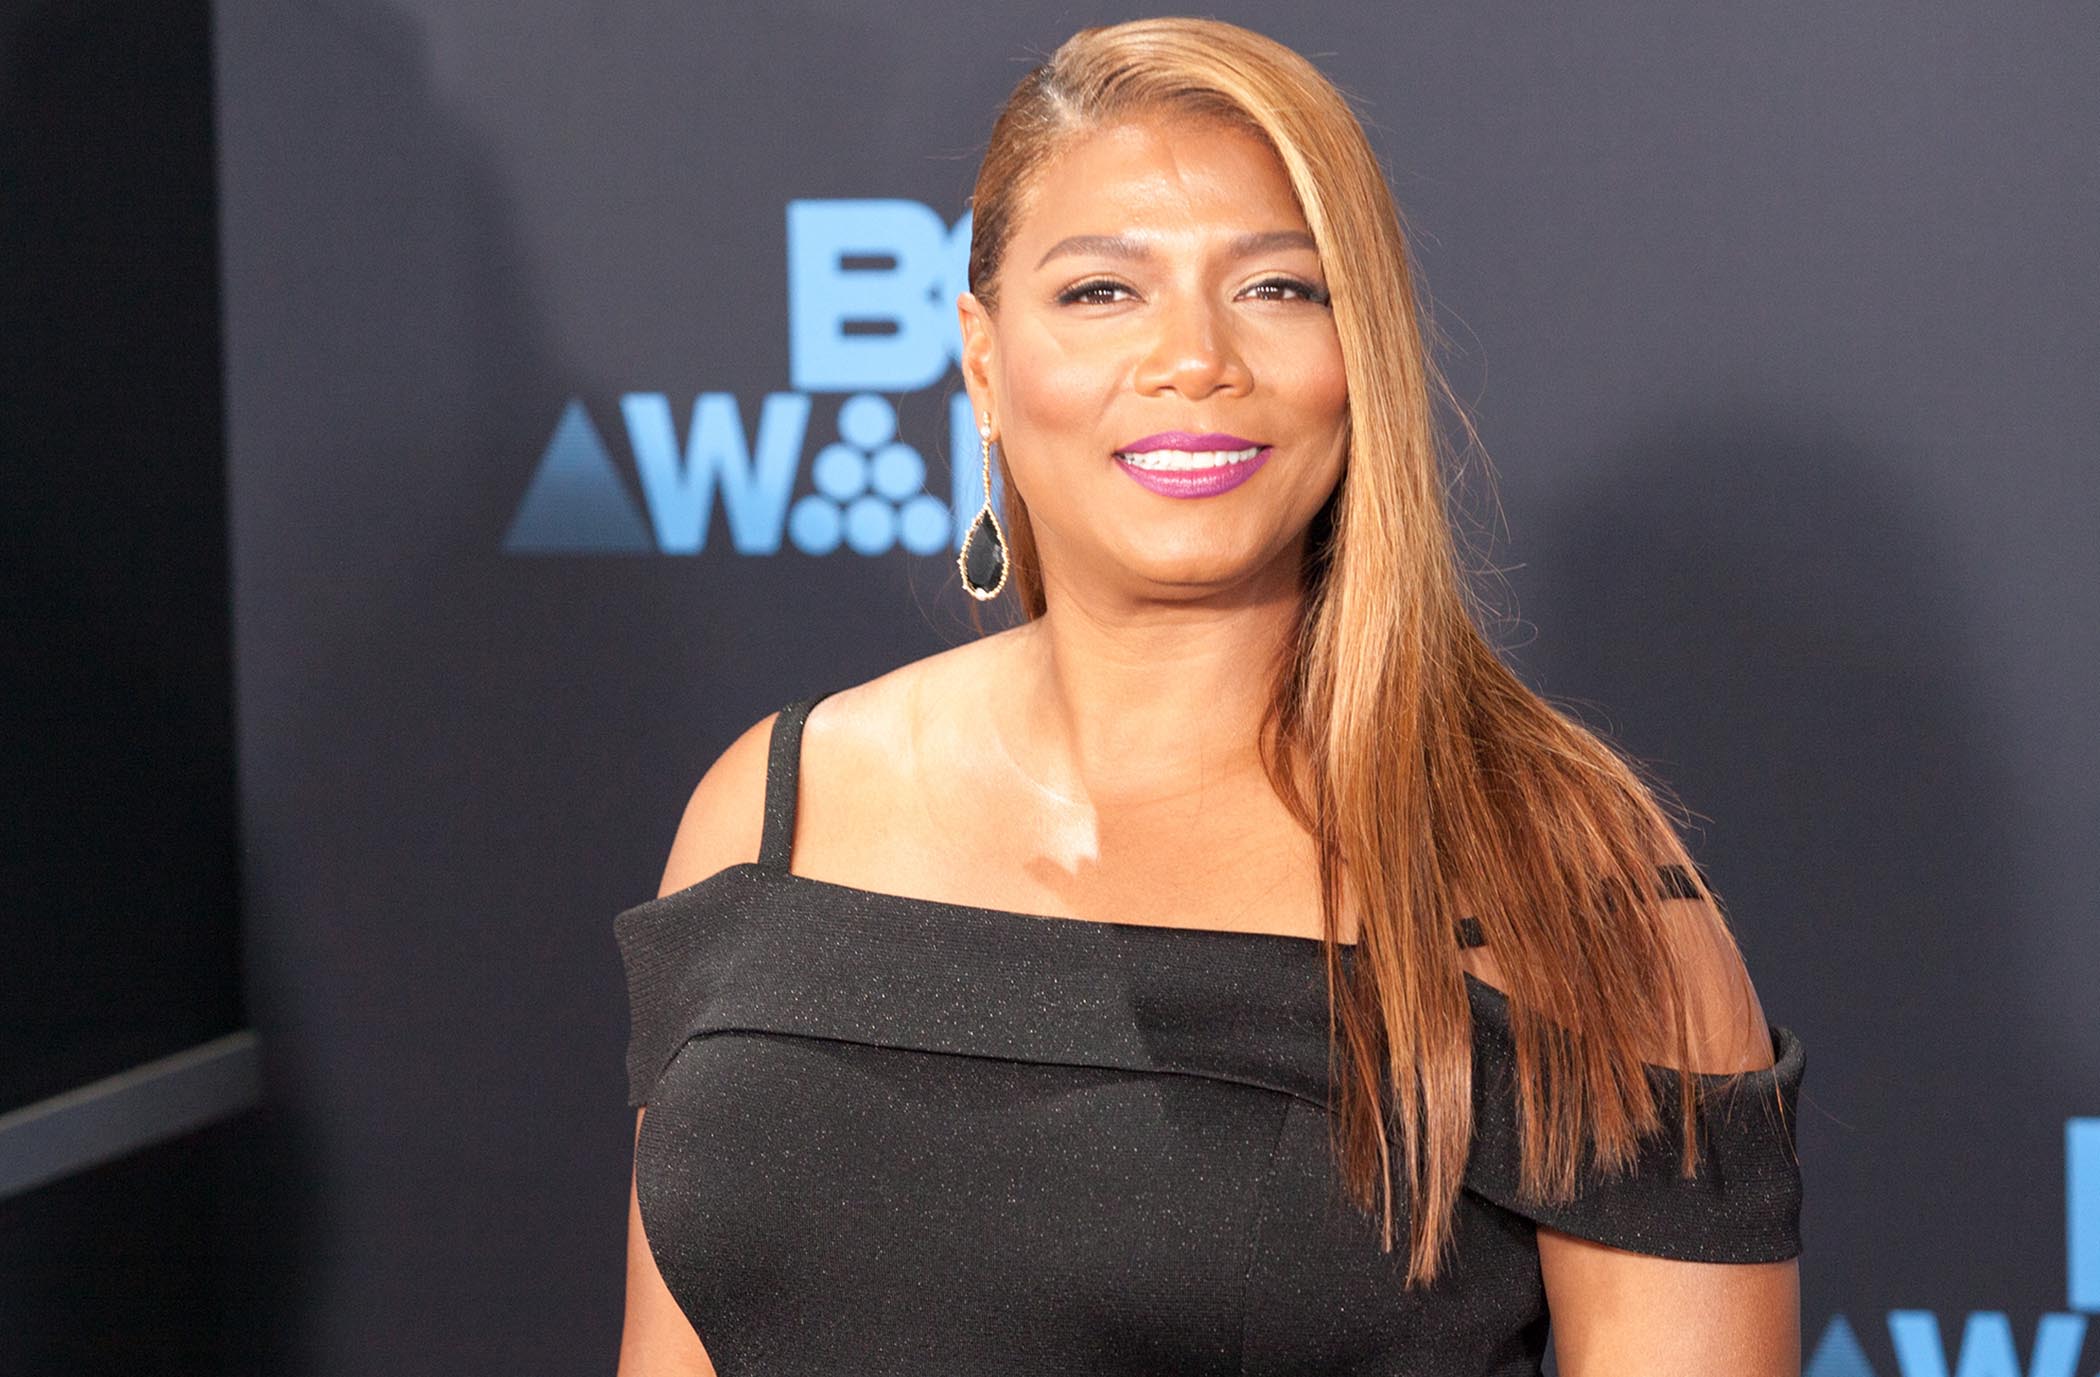 Queen Latifah's iconic performances have rocked since the 90s. Here are ten of them, ranked from decent to crownworthy.